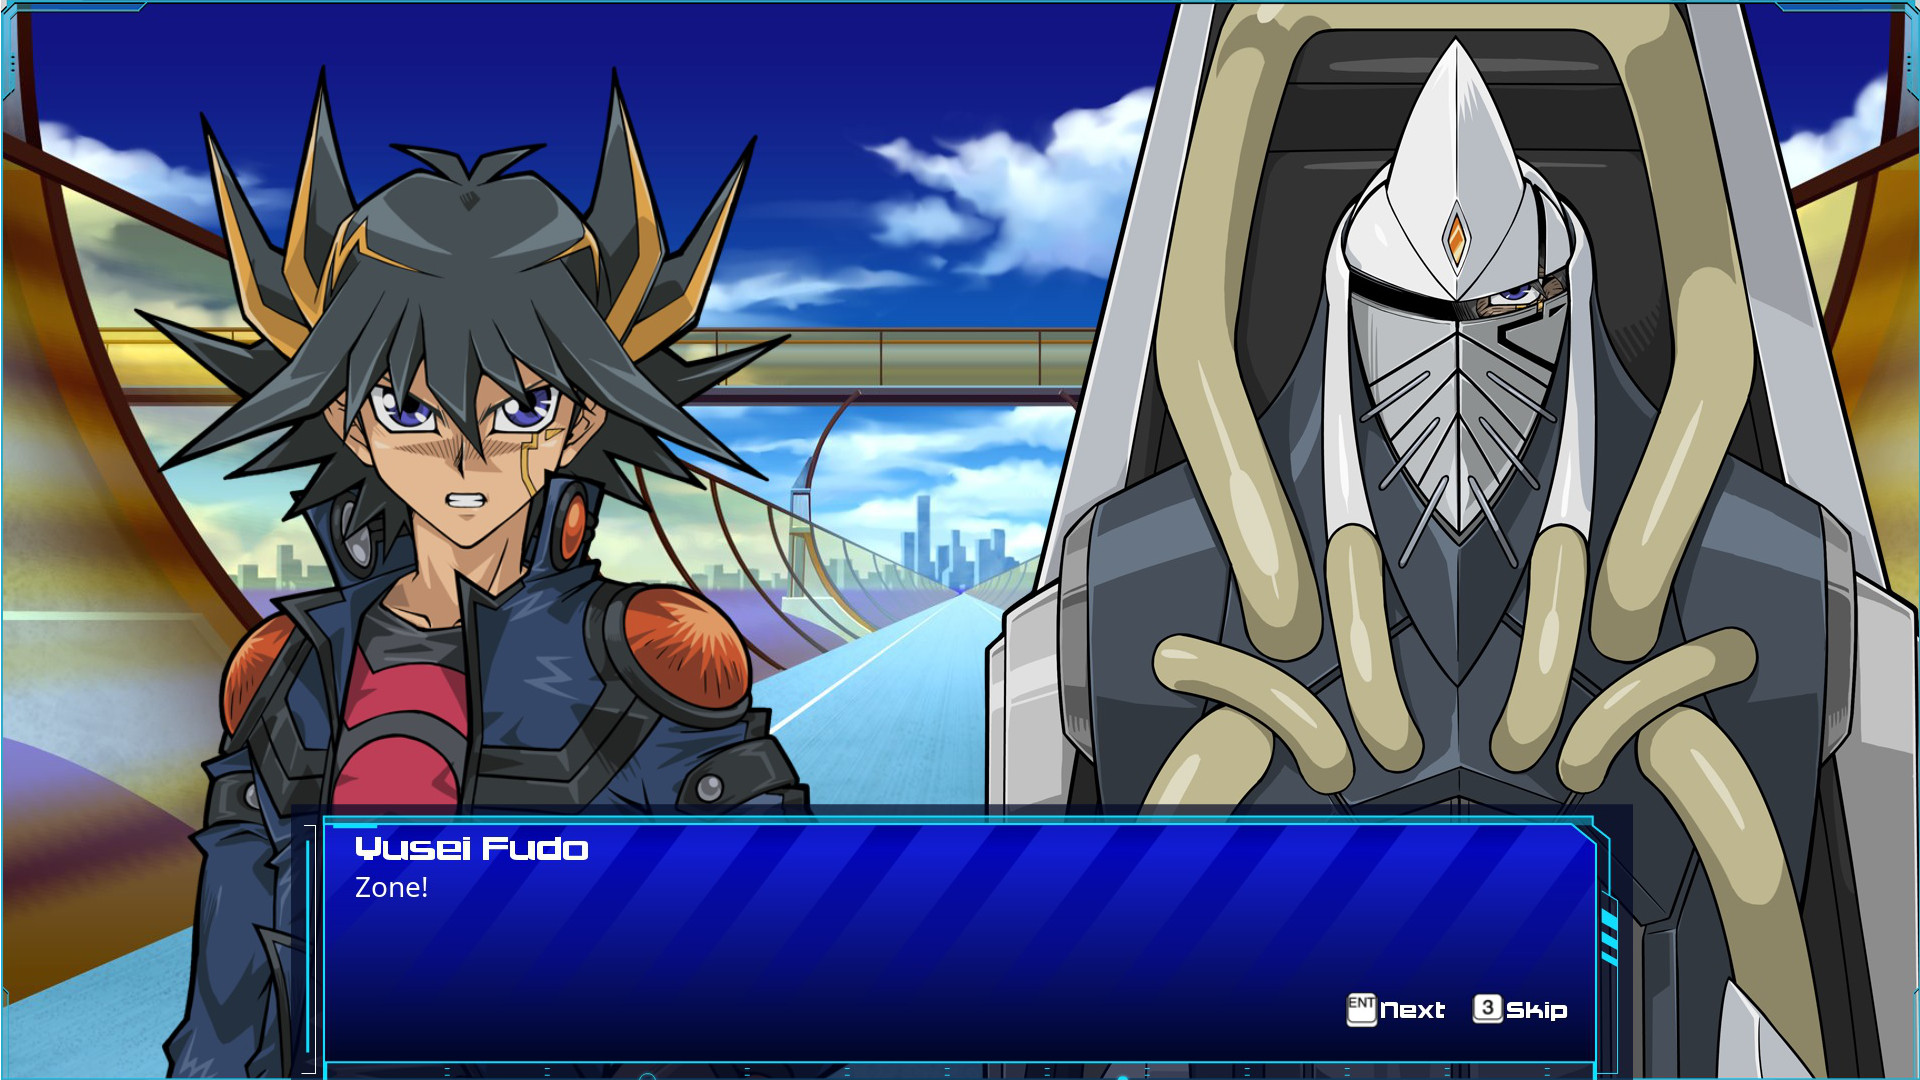 Yu-Gi-Oh! - 5D’s For The Future DLC Steam CD Key